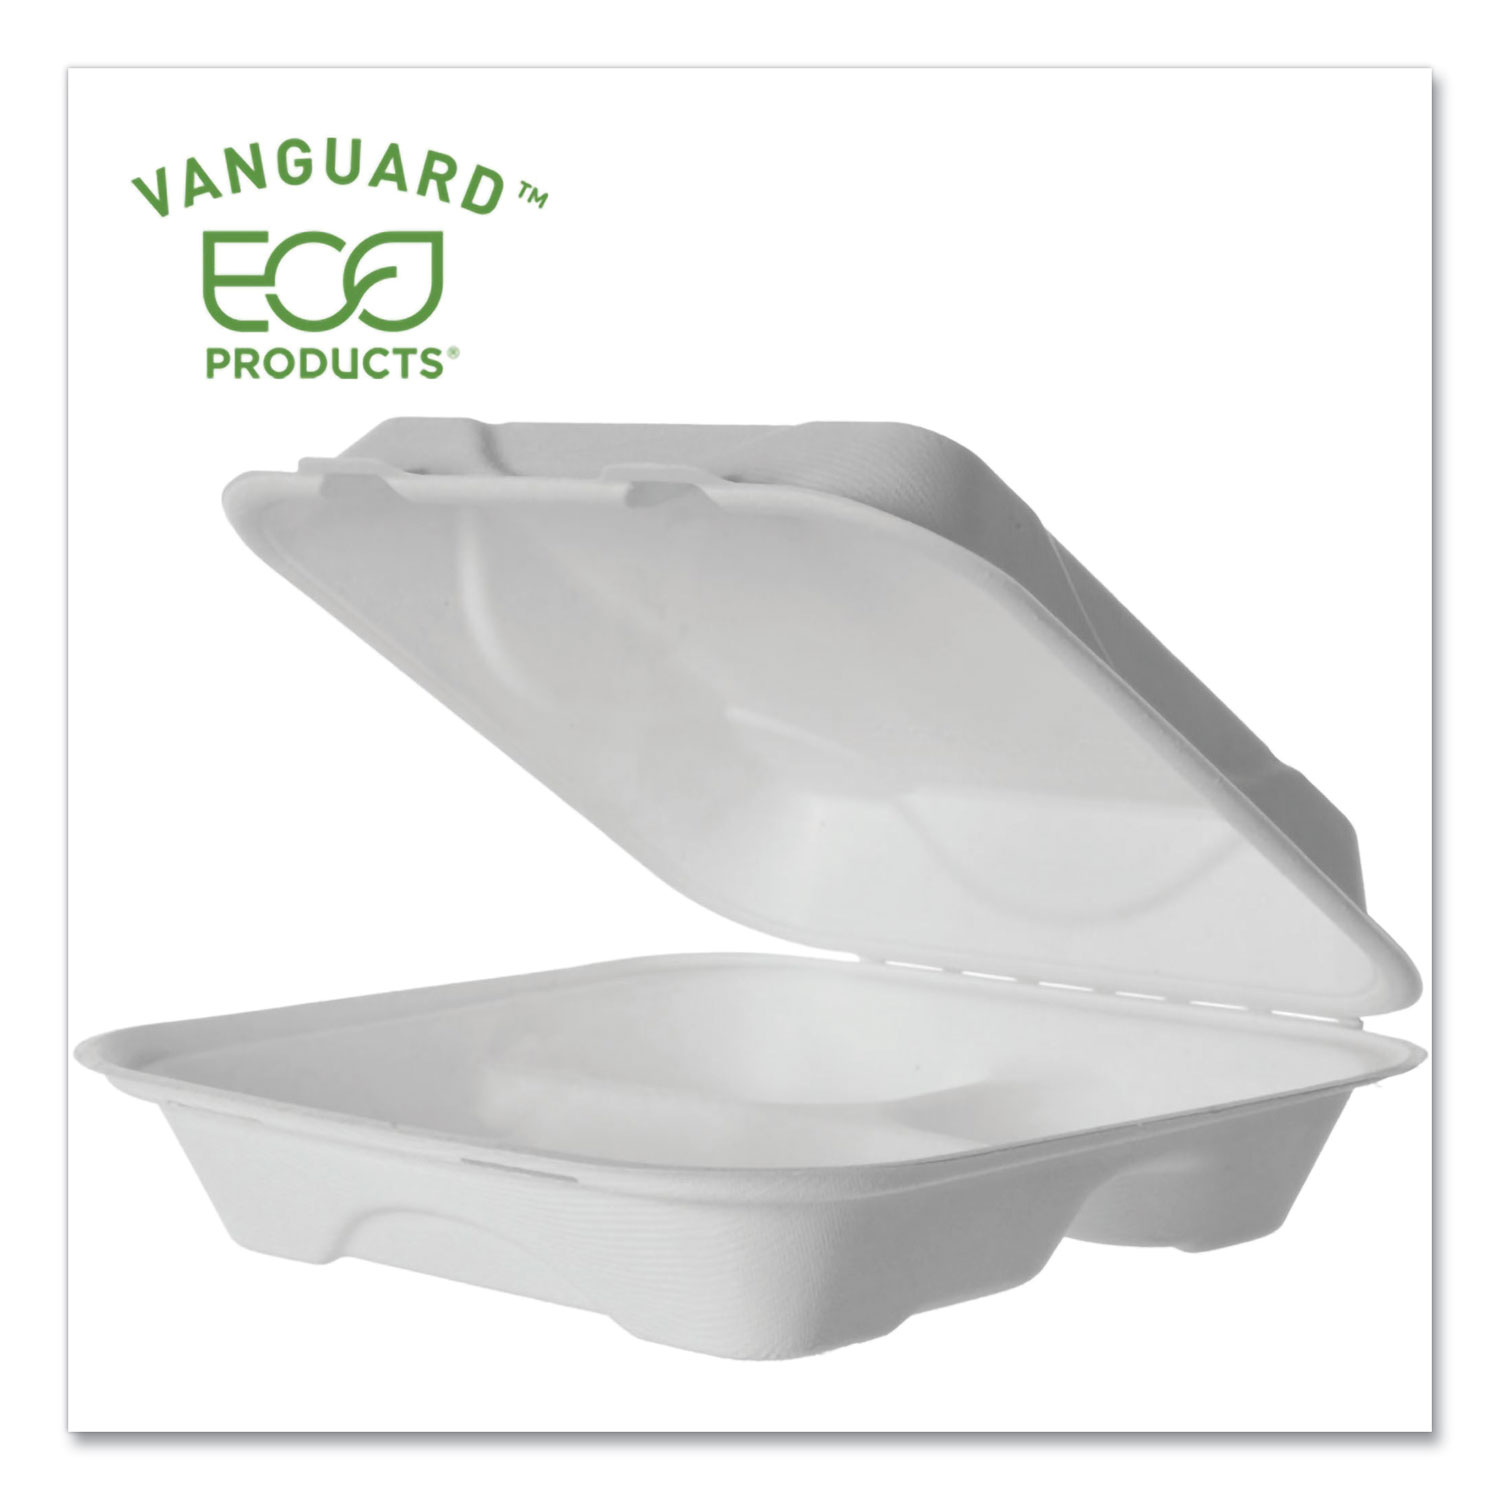  Eco-Products EP-HC93NFA Vanguard Renewable and Compostable Sugarcane Clamshells, 3-Compartment, 9 x 9 x 3, White, 200/Carton (ECOEPHC93NFA) 